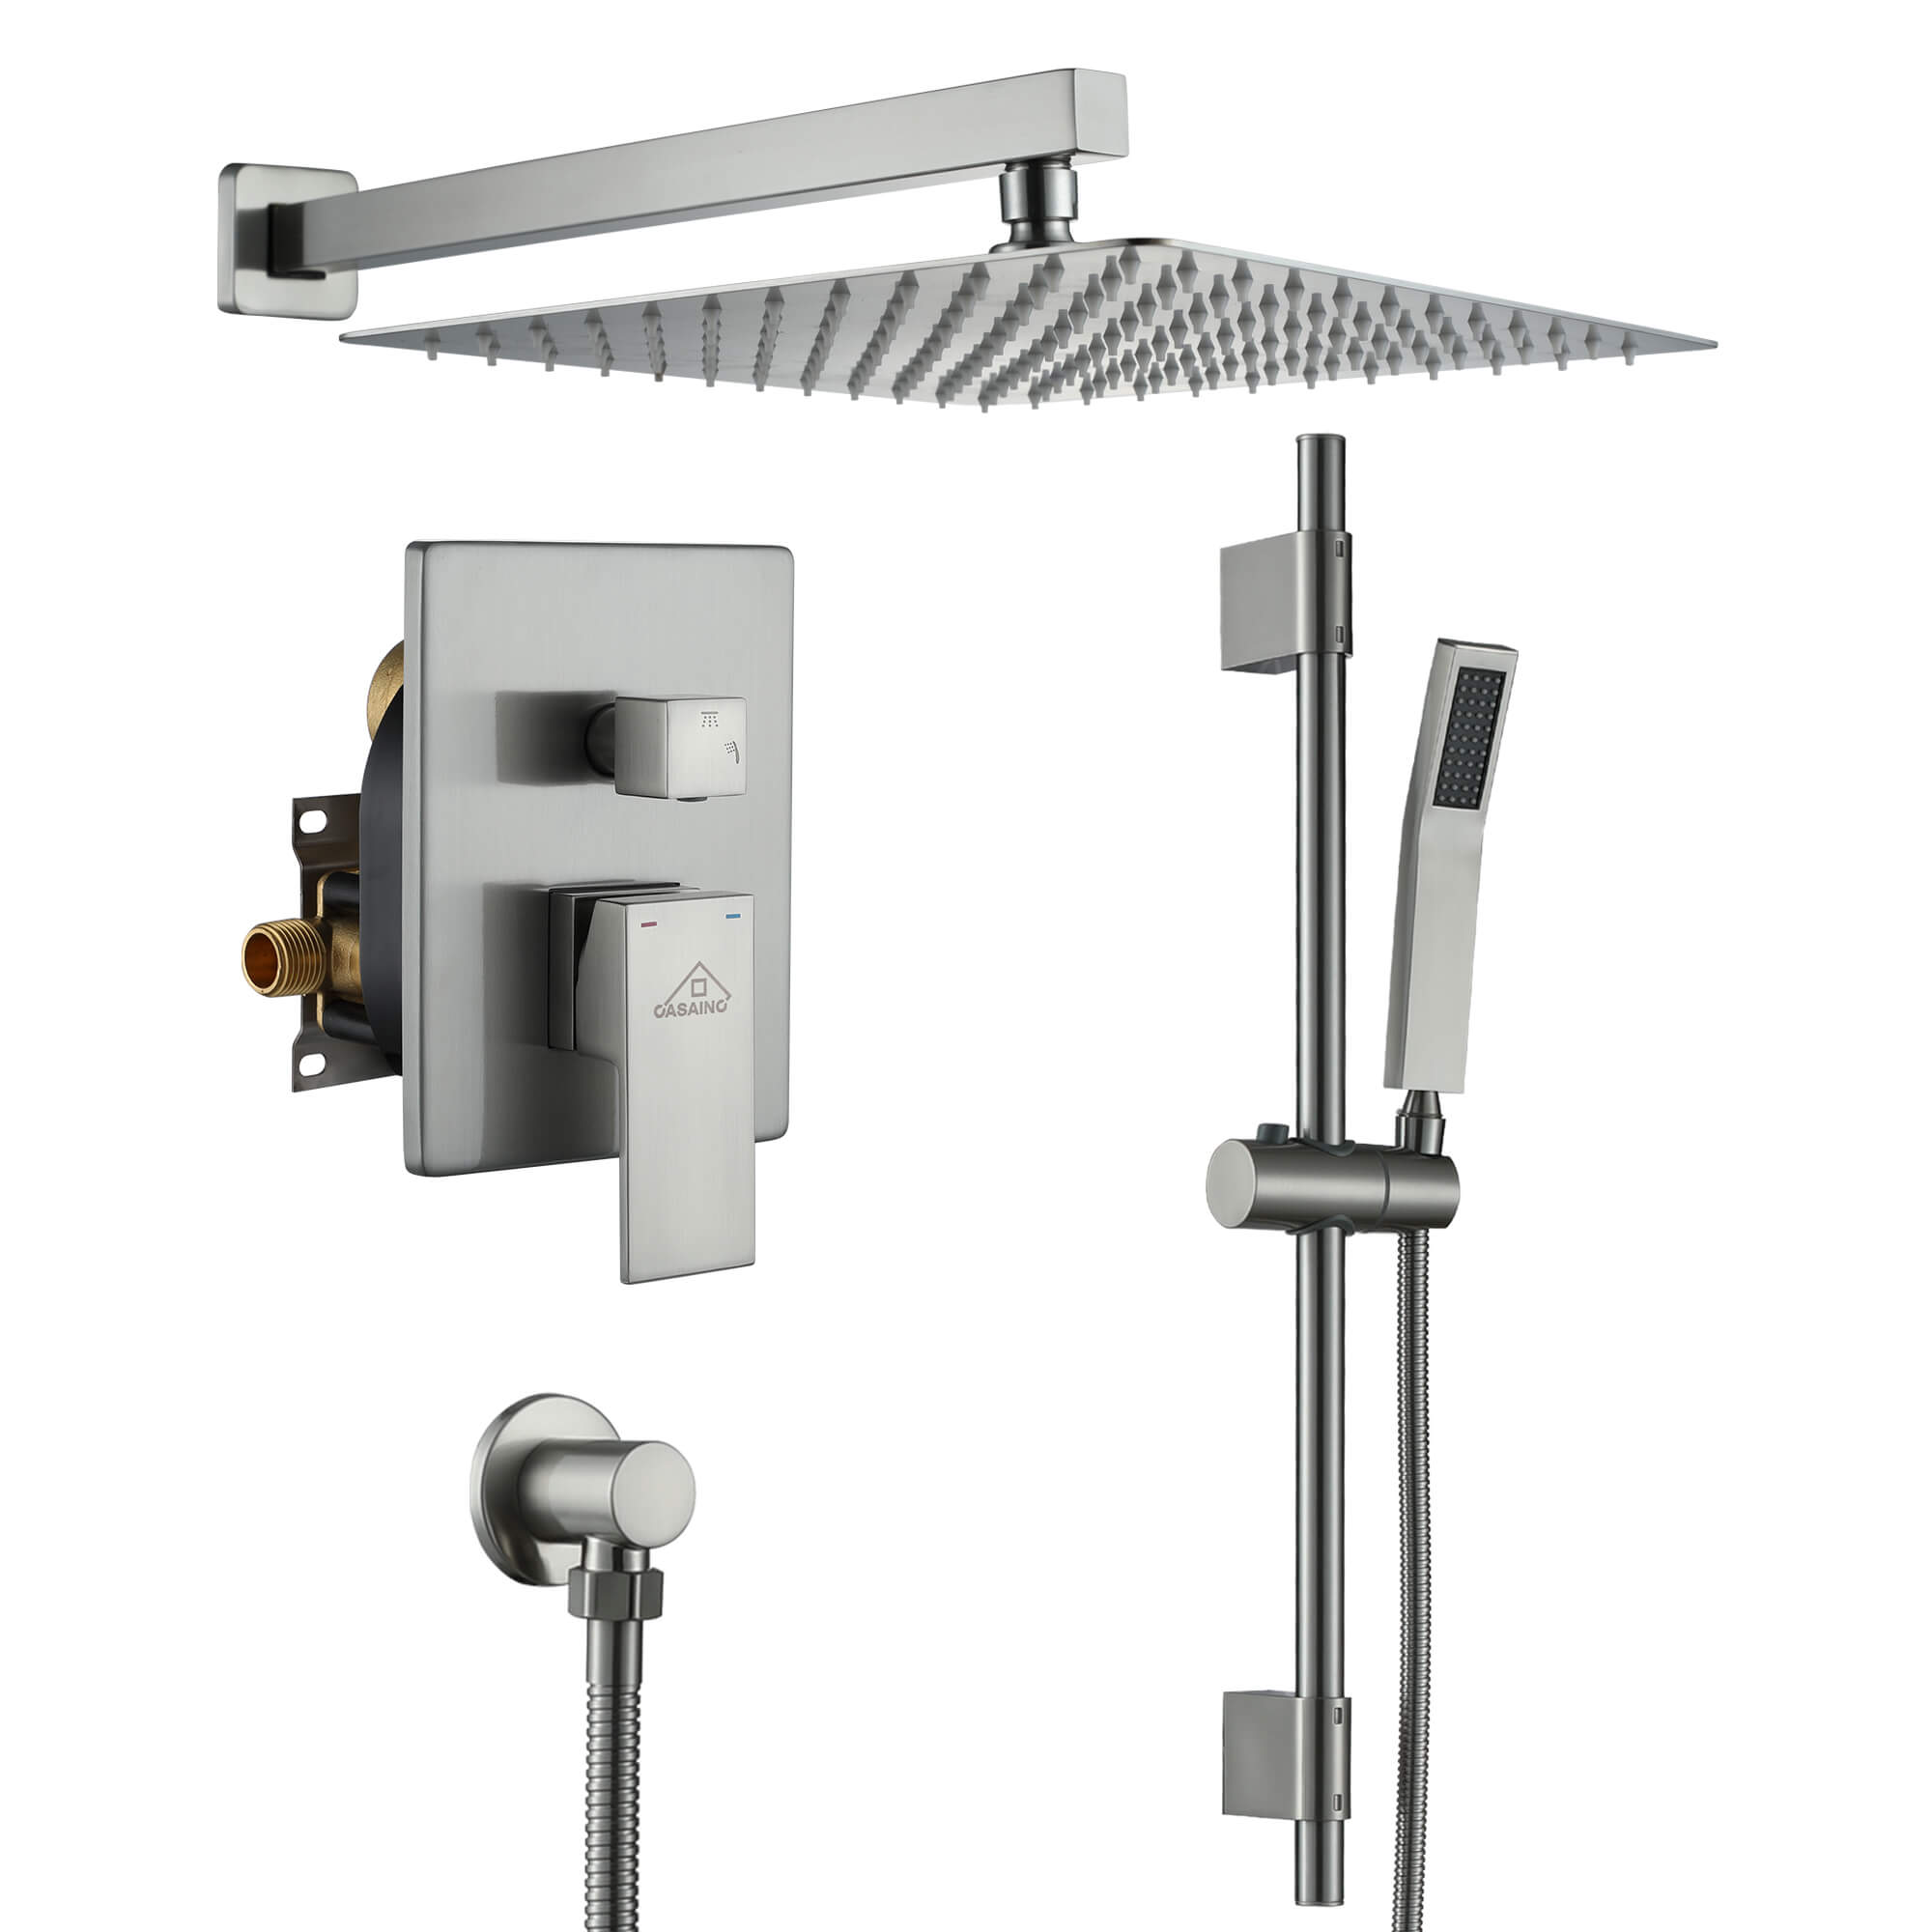 CASAINC Brushed Nickel Wall Mount Built-In Shower System with Sliding Bar